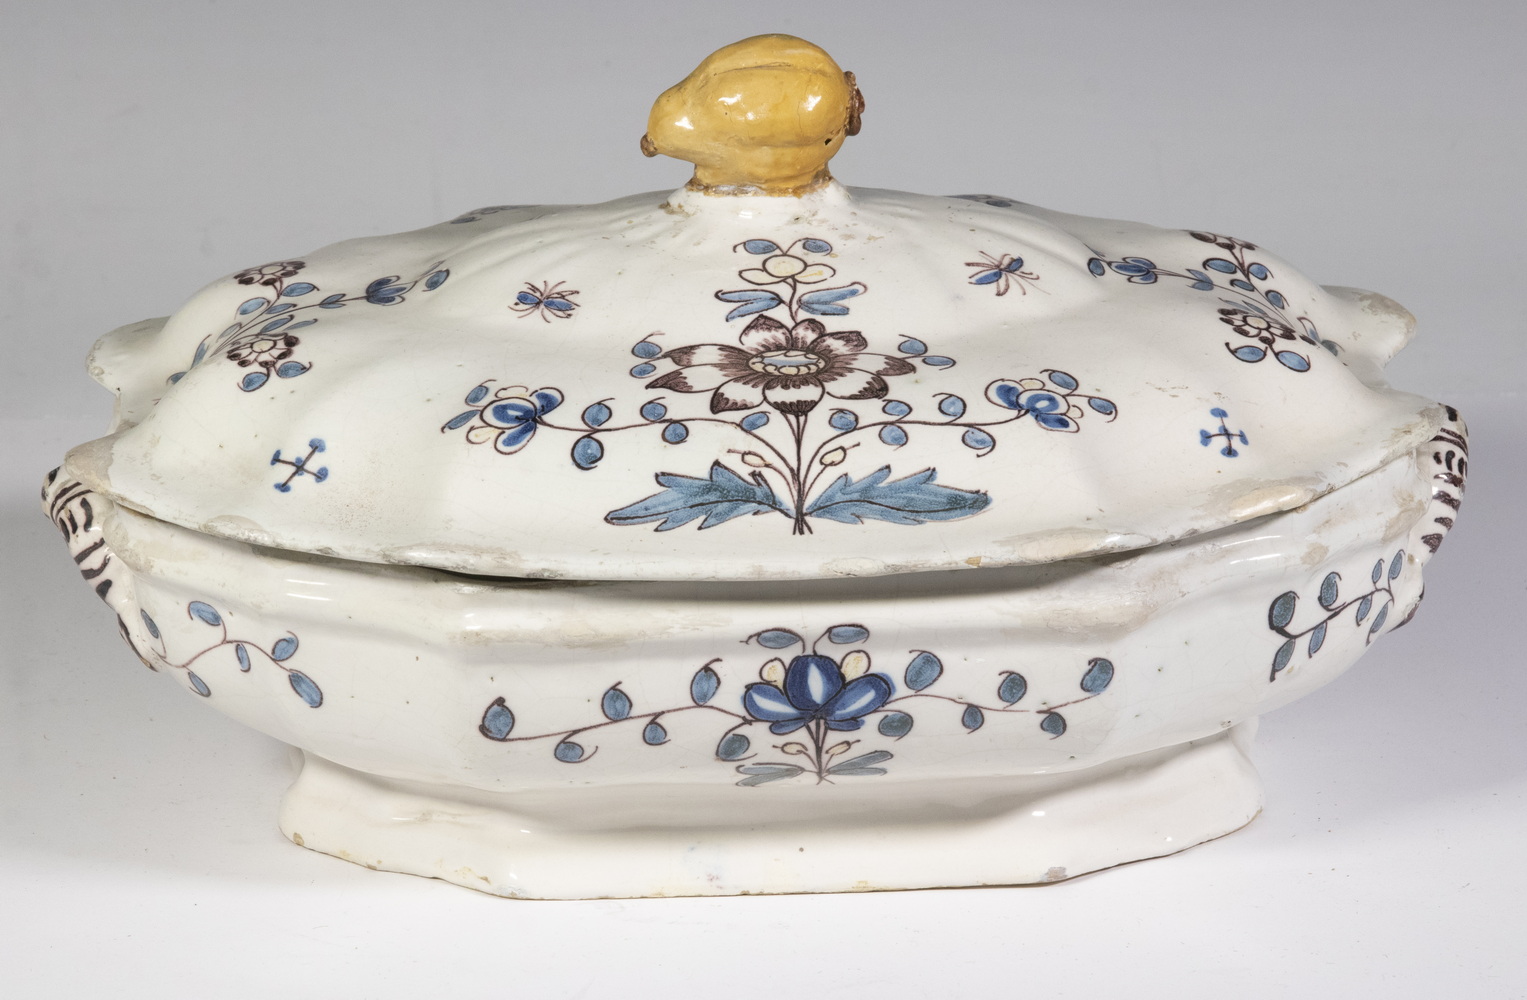 EARLY FRENCH FAIENCE LIDDED TUREEN